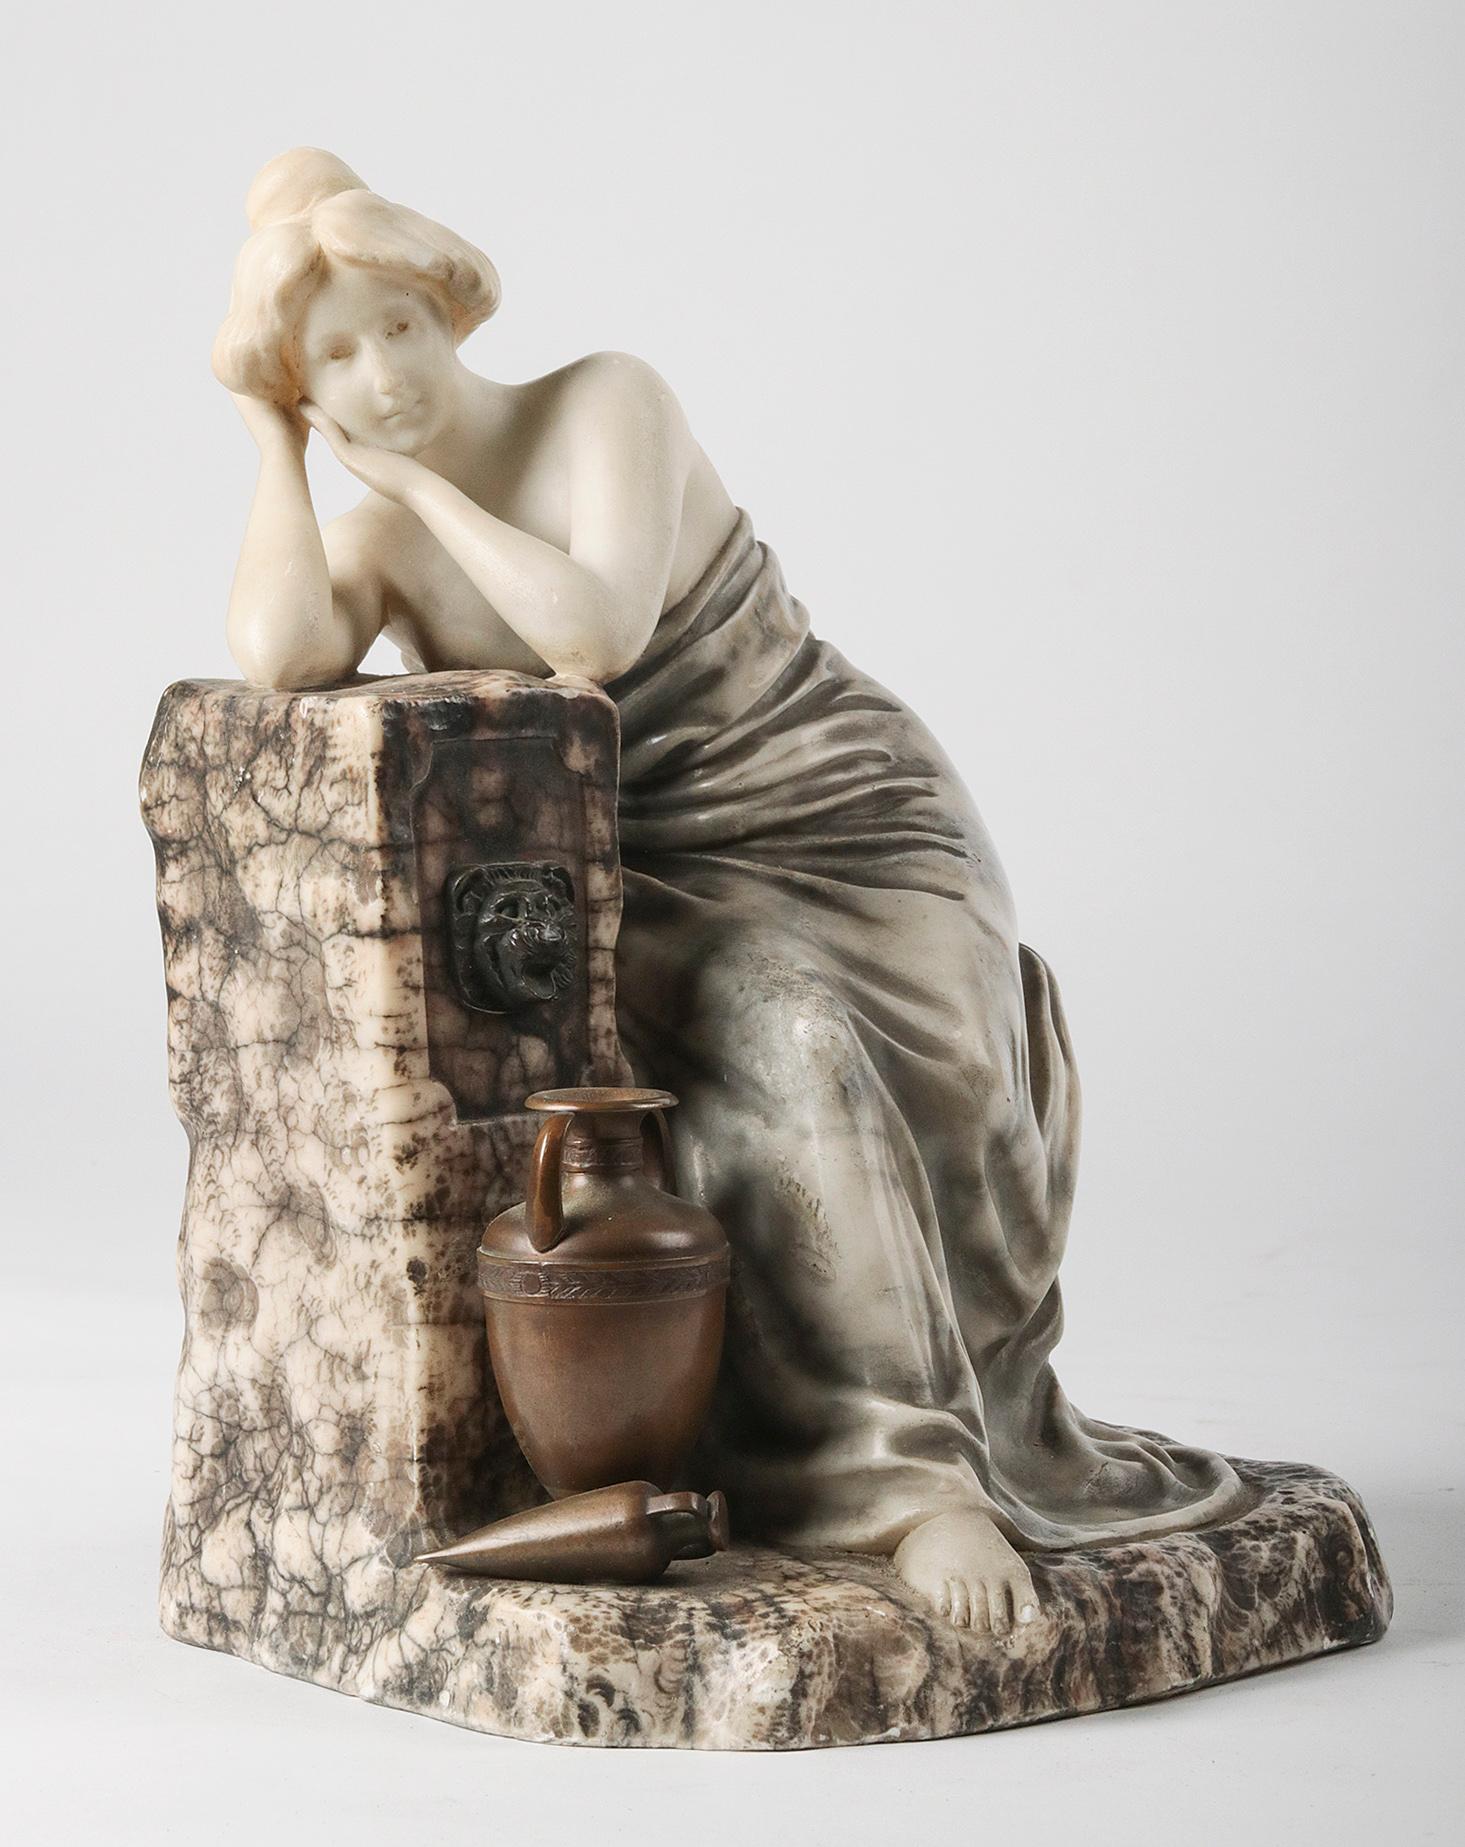 Multiple colored alabaster statue of a lady, sitting on a bench next to a water fountain. The vases are made of bronze. It is hand-sculpted from alabaster marble. The statue is signed: Brovoni
Made in Italy, 1900-1910. Dimensions: 32 x 22 x 21 cm